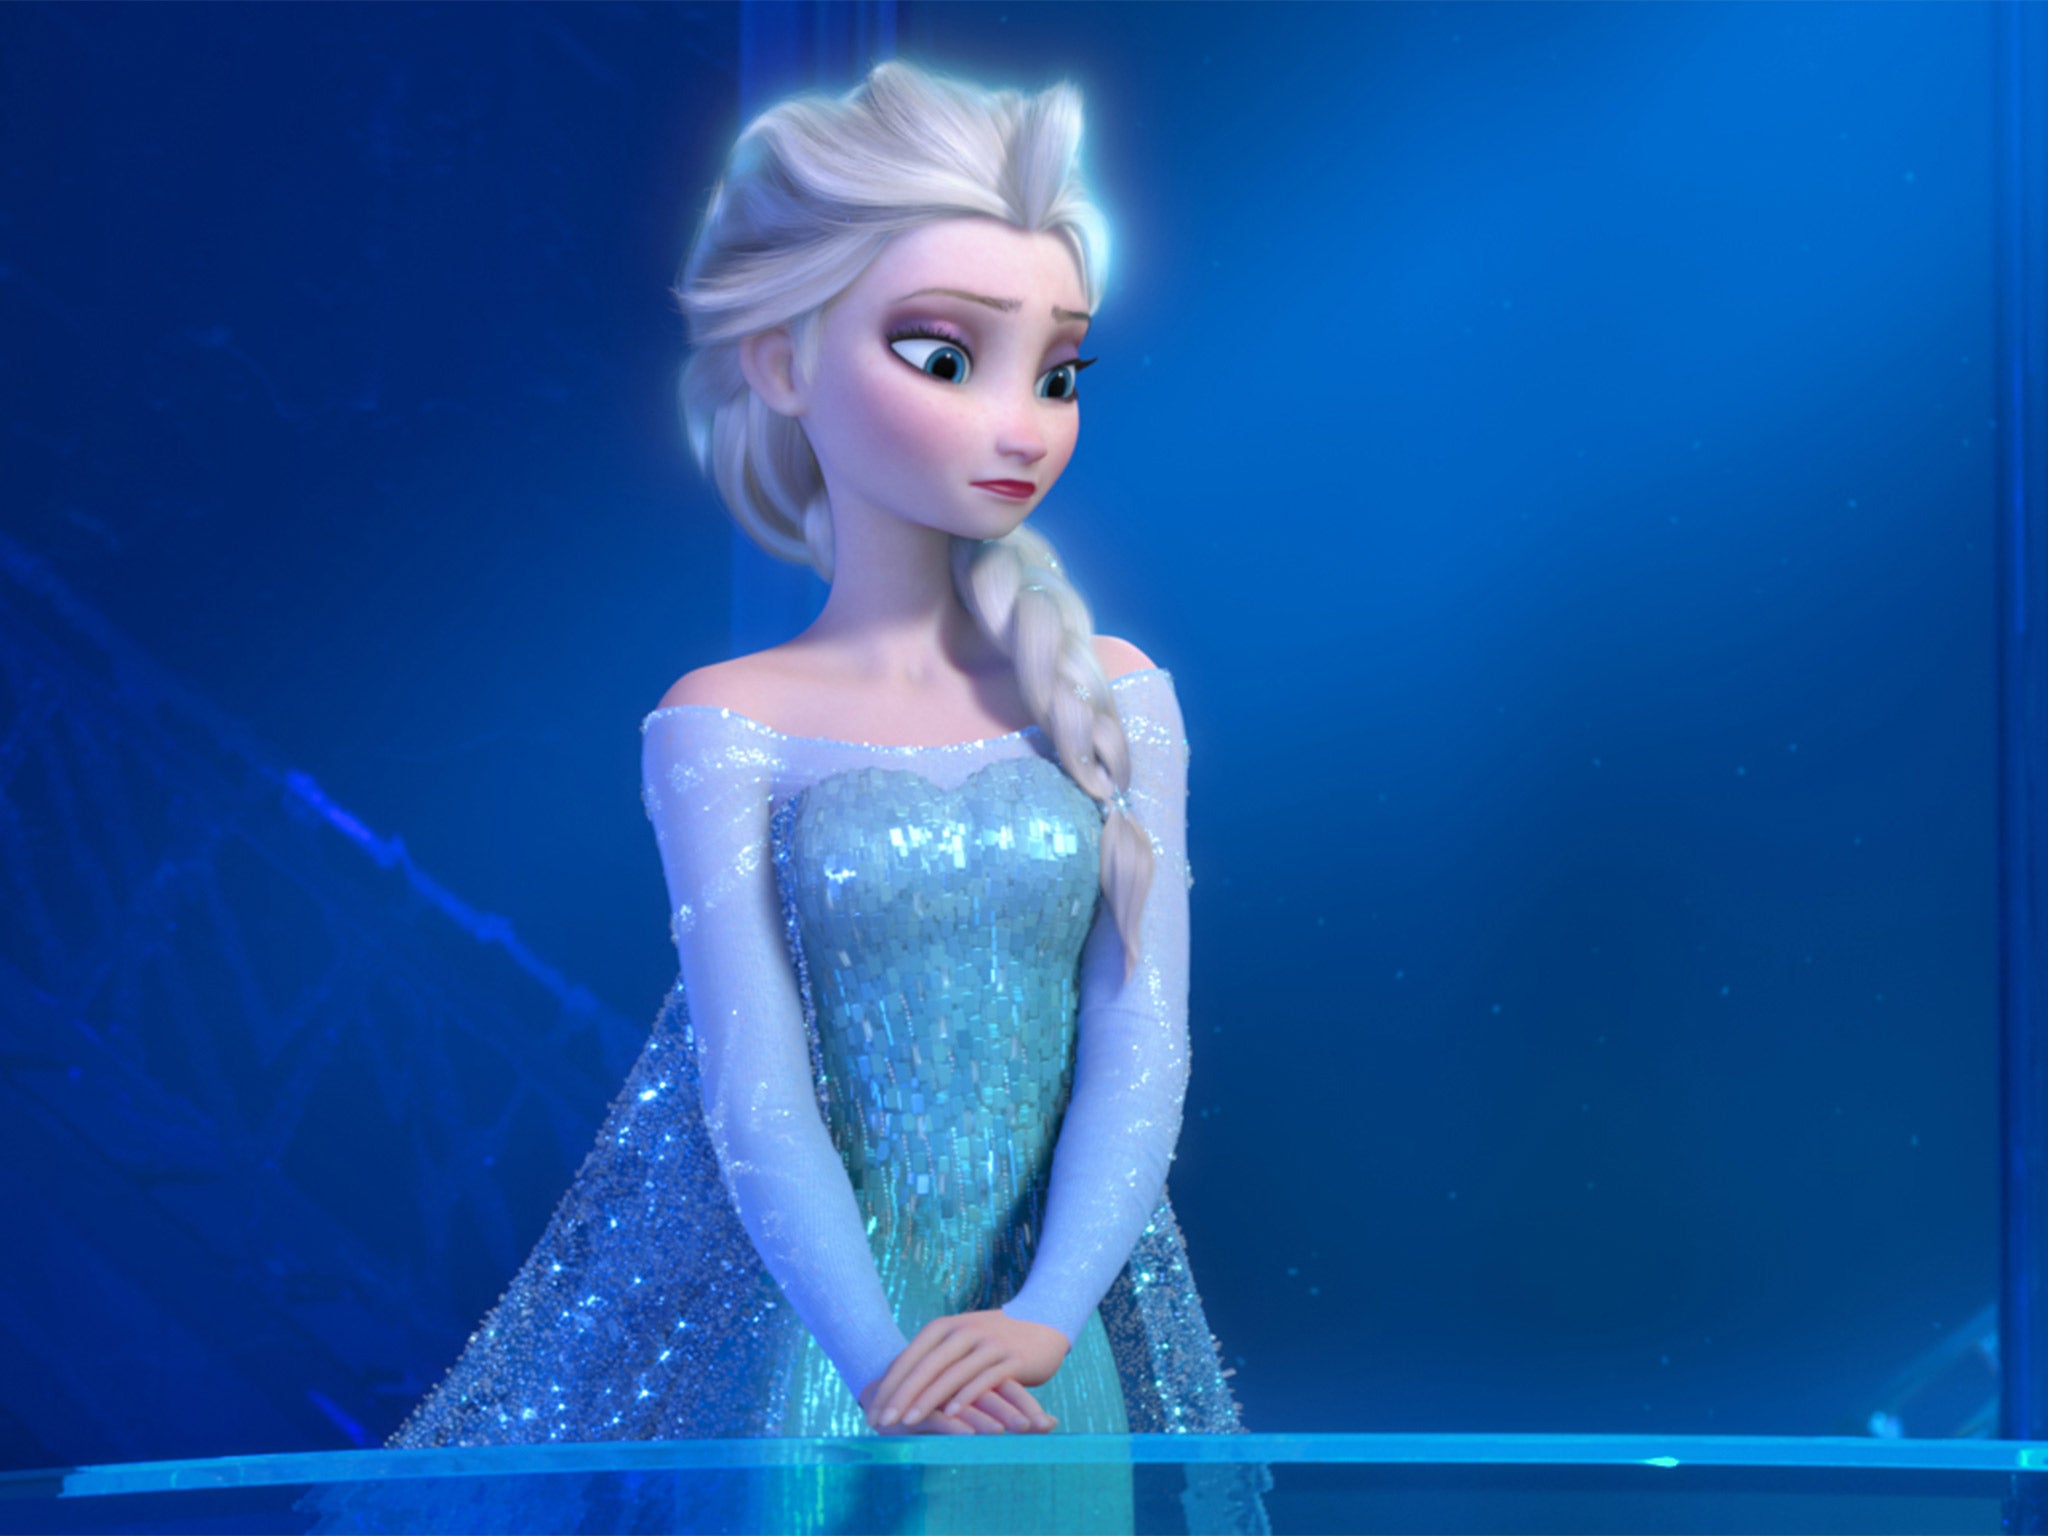 Dolls depicting Frozen characters have been counterfeited